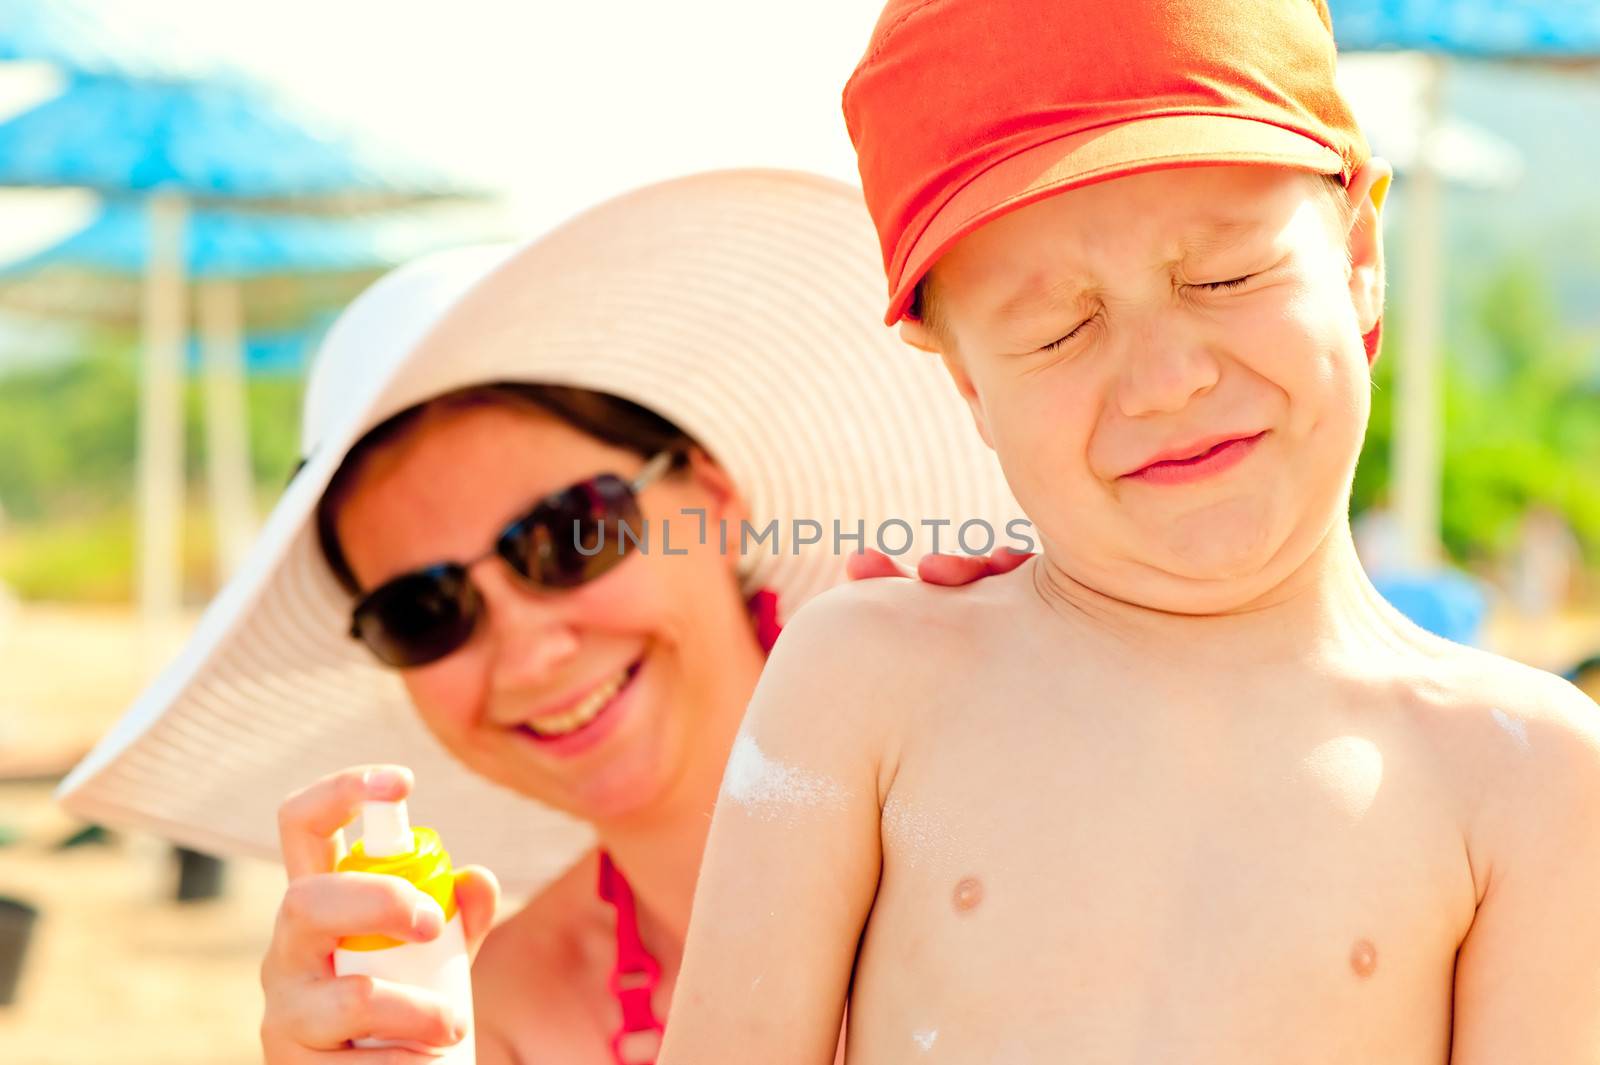 Mom puts on the baby's skin lotion for sun protection